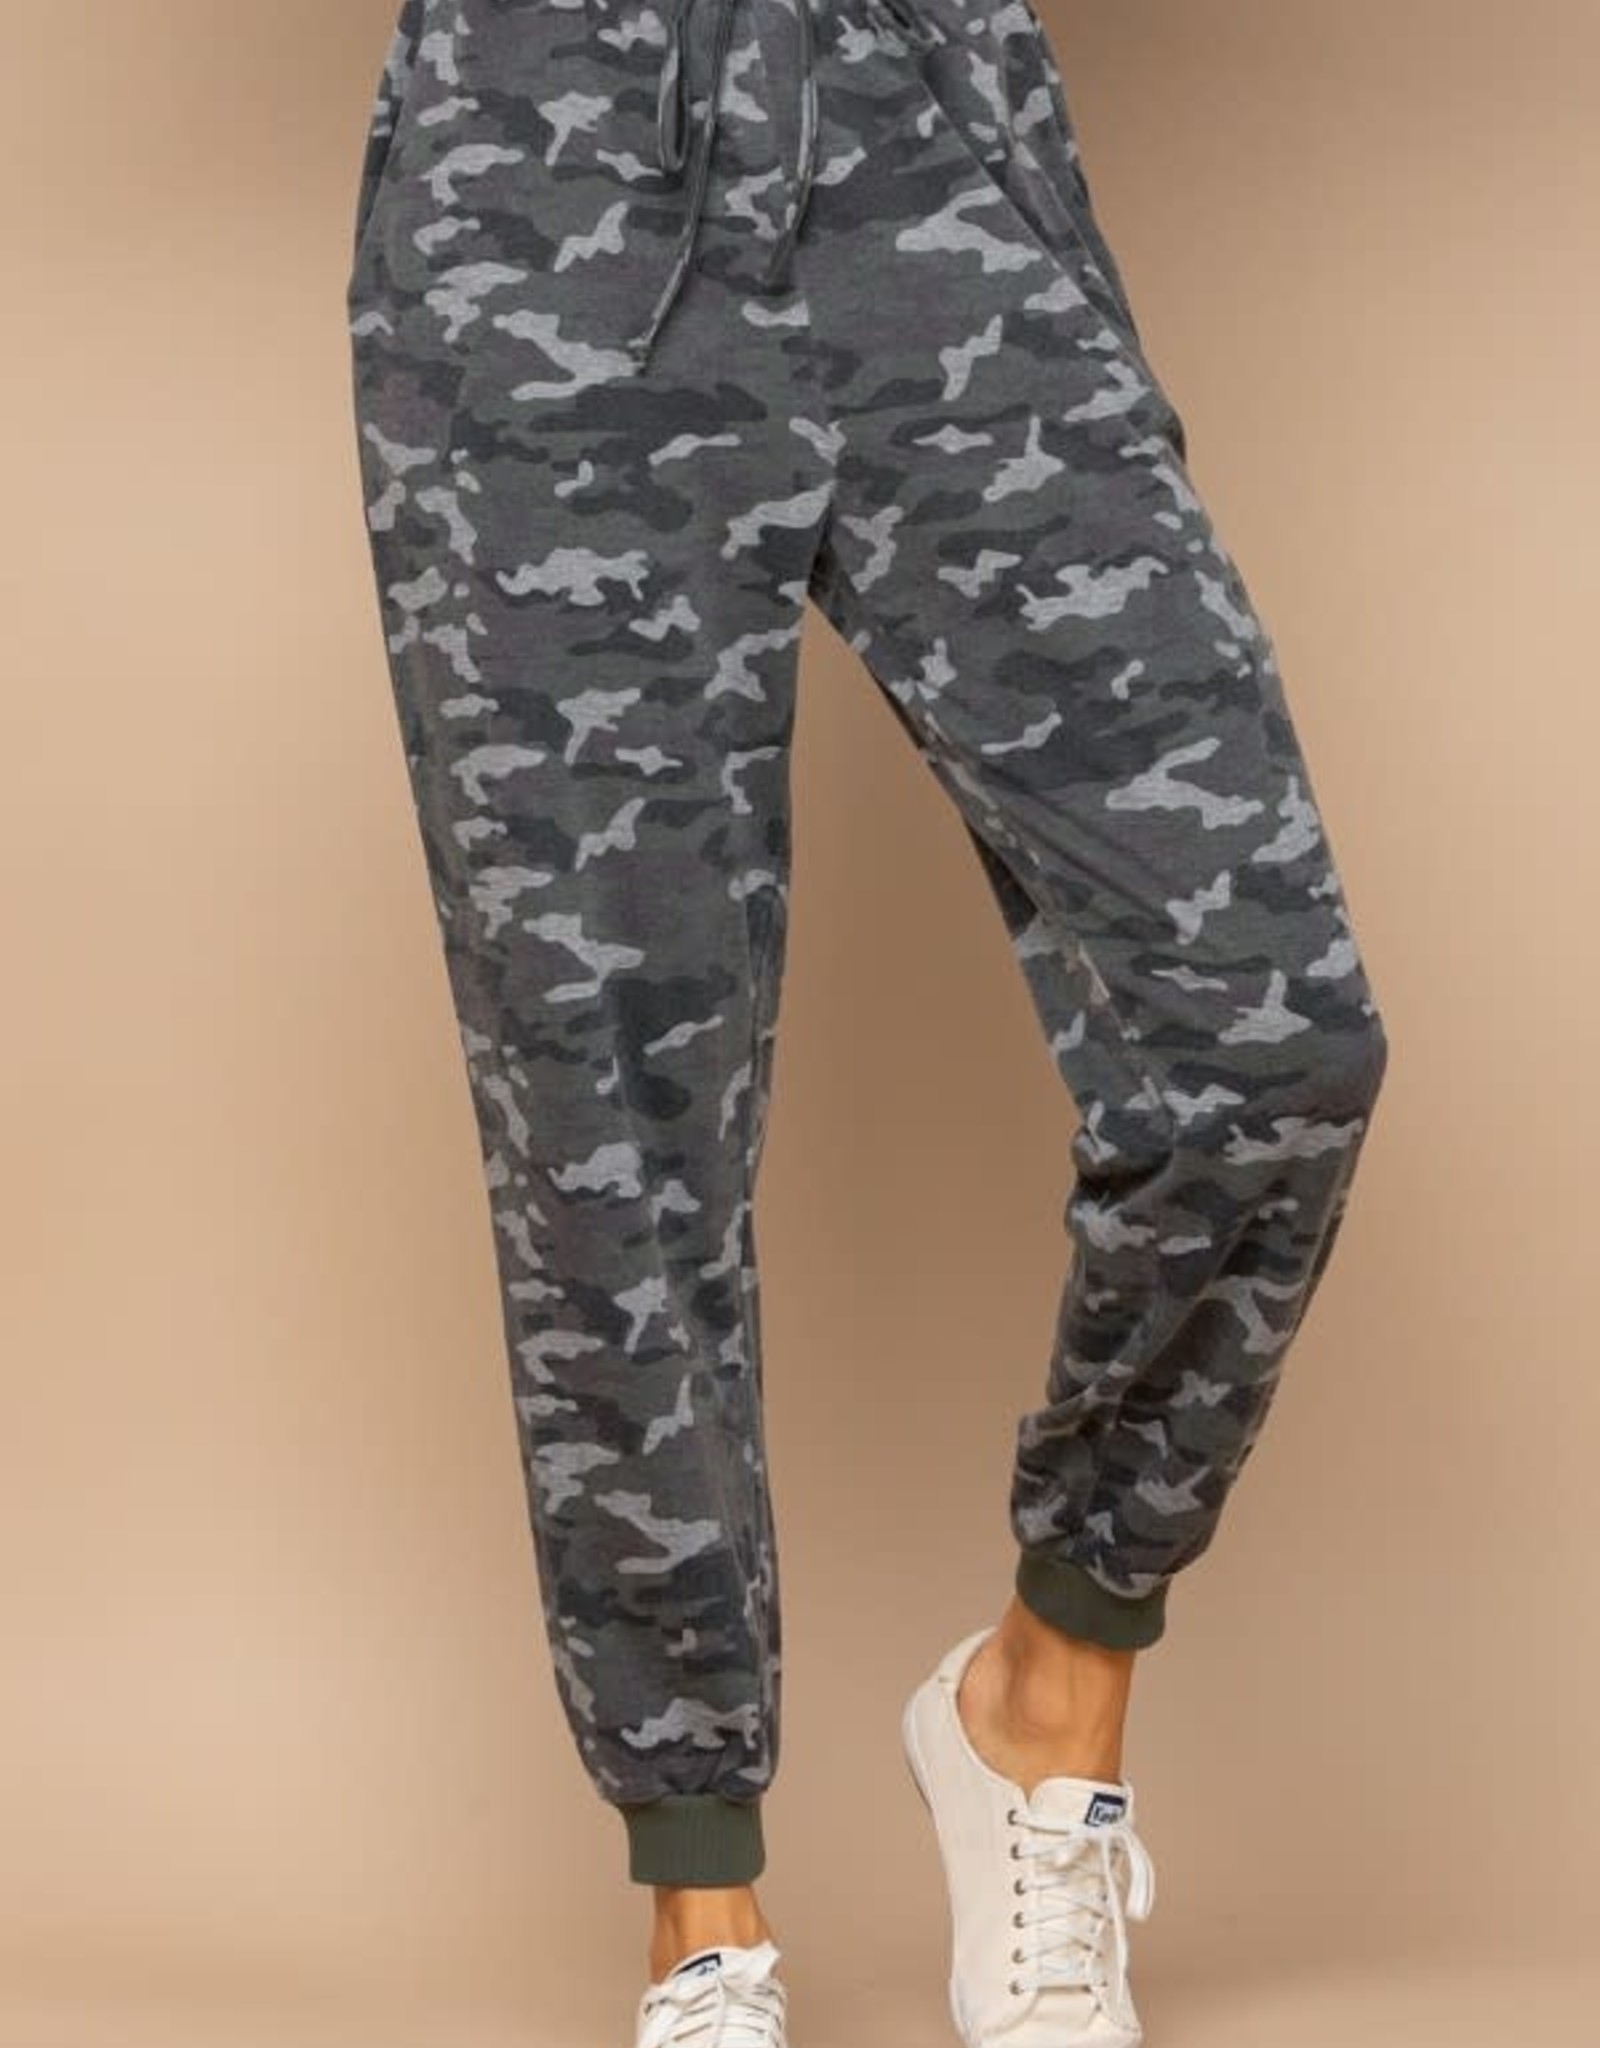 Oddi Camouflage Printed French Terry Knit Jogger Pants - IP13499